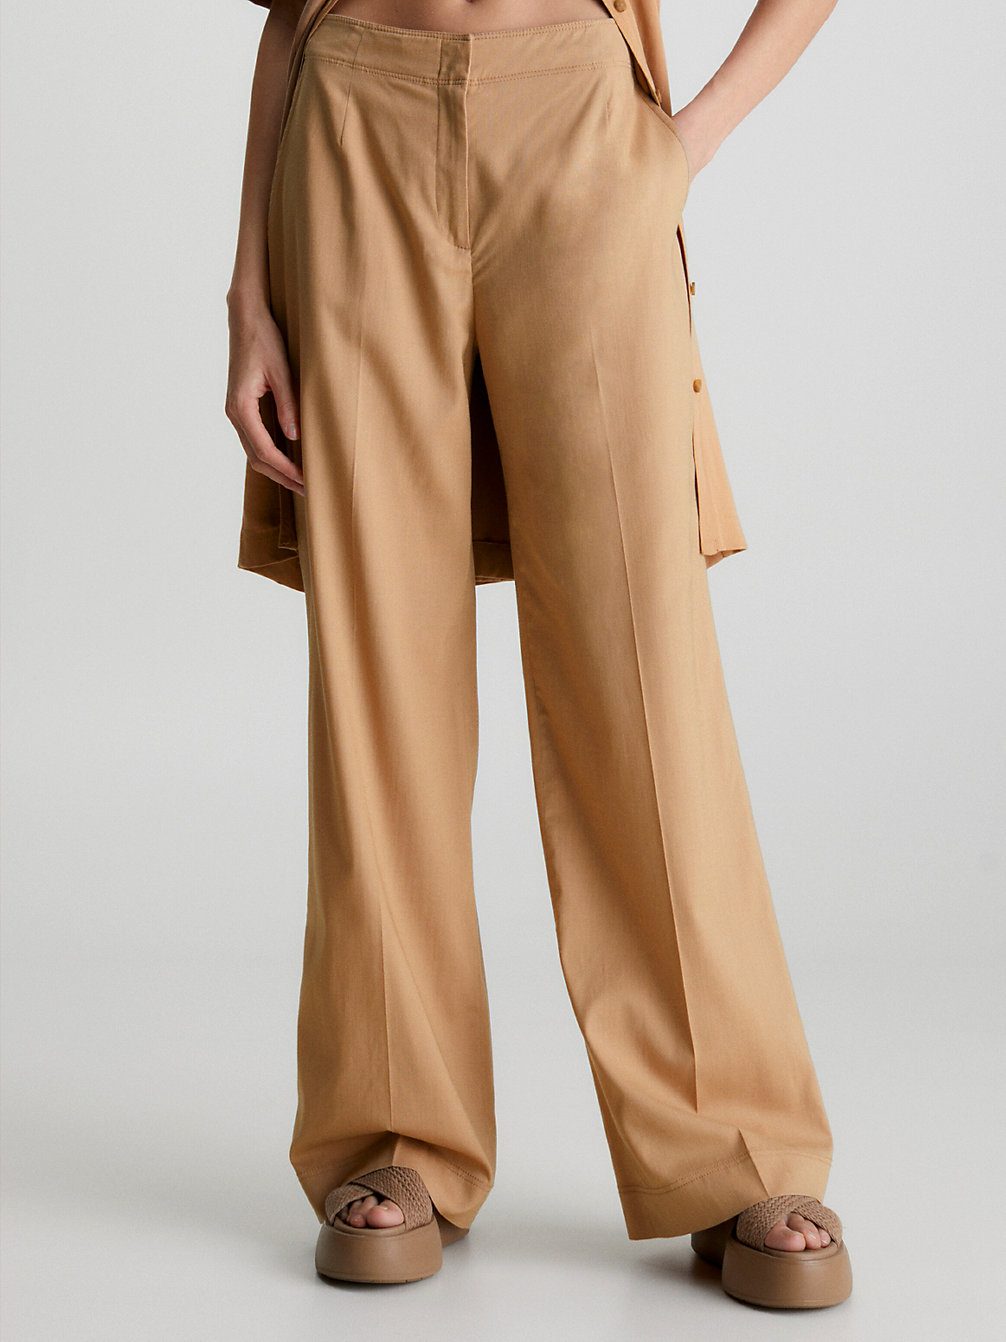 Pantalón Suave Recto Tailored > TIMELESS CAMEL > undefined mujer > Calvin Klein